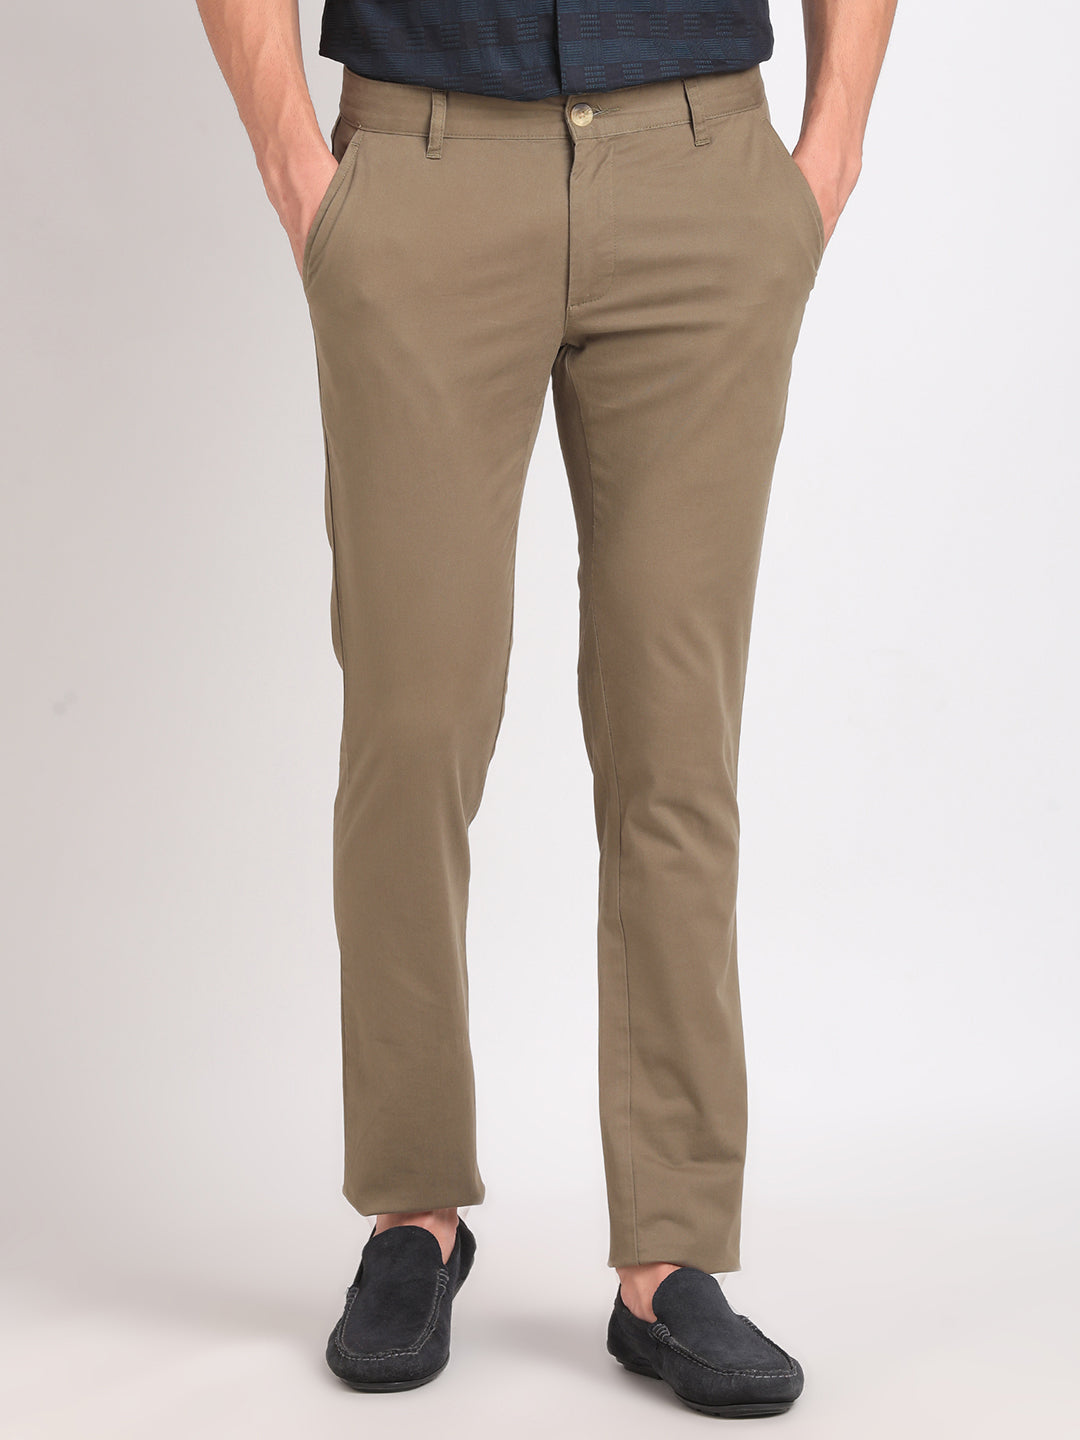 Jeff Banks | Men's Stretch Navy Cotton Chinos | Suit Direct